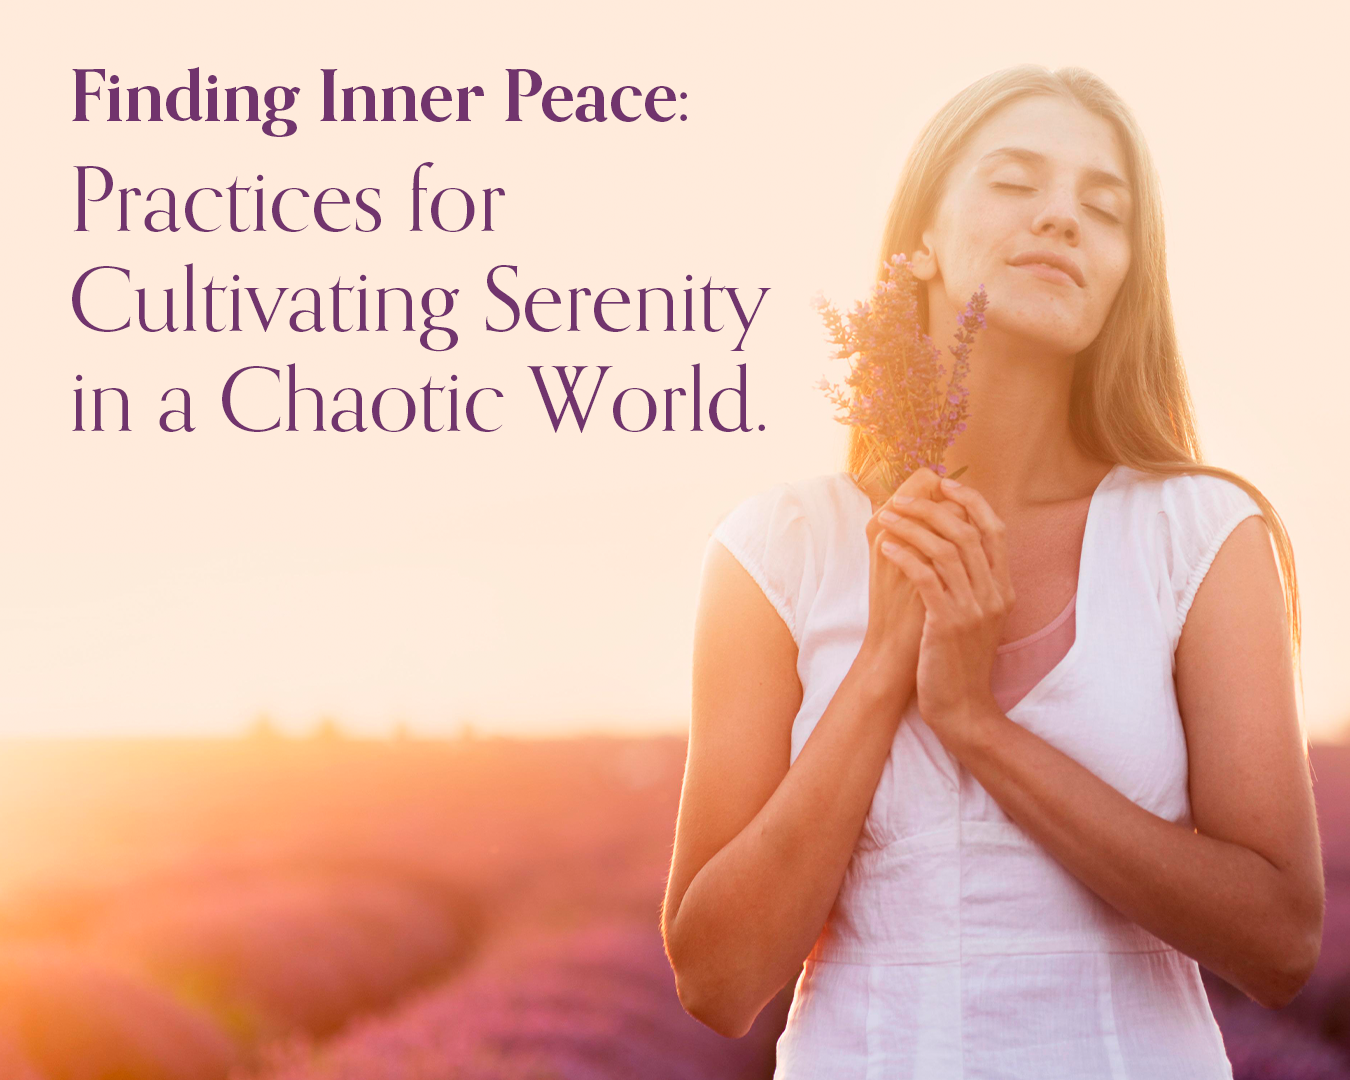 Finding Inner Peace: Practices for Cultivating Serenity in a Chaotic World.